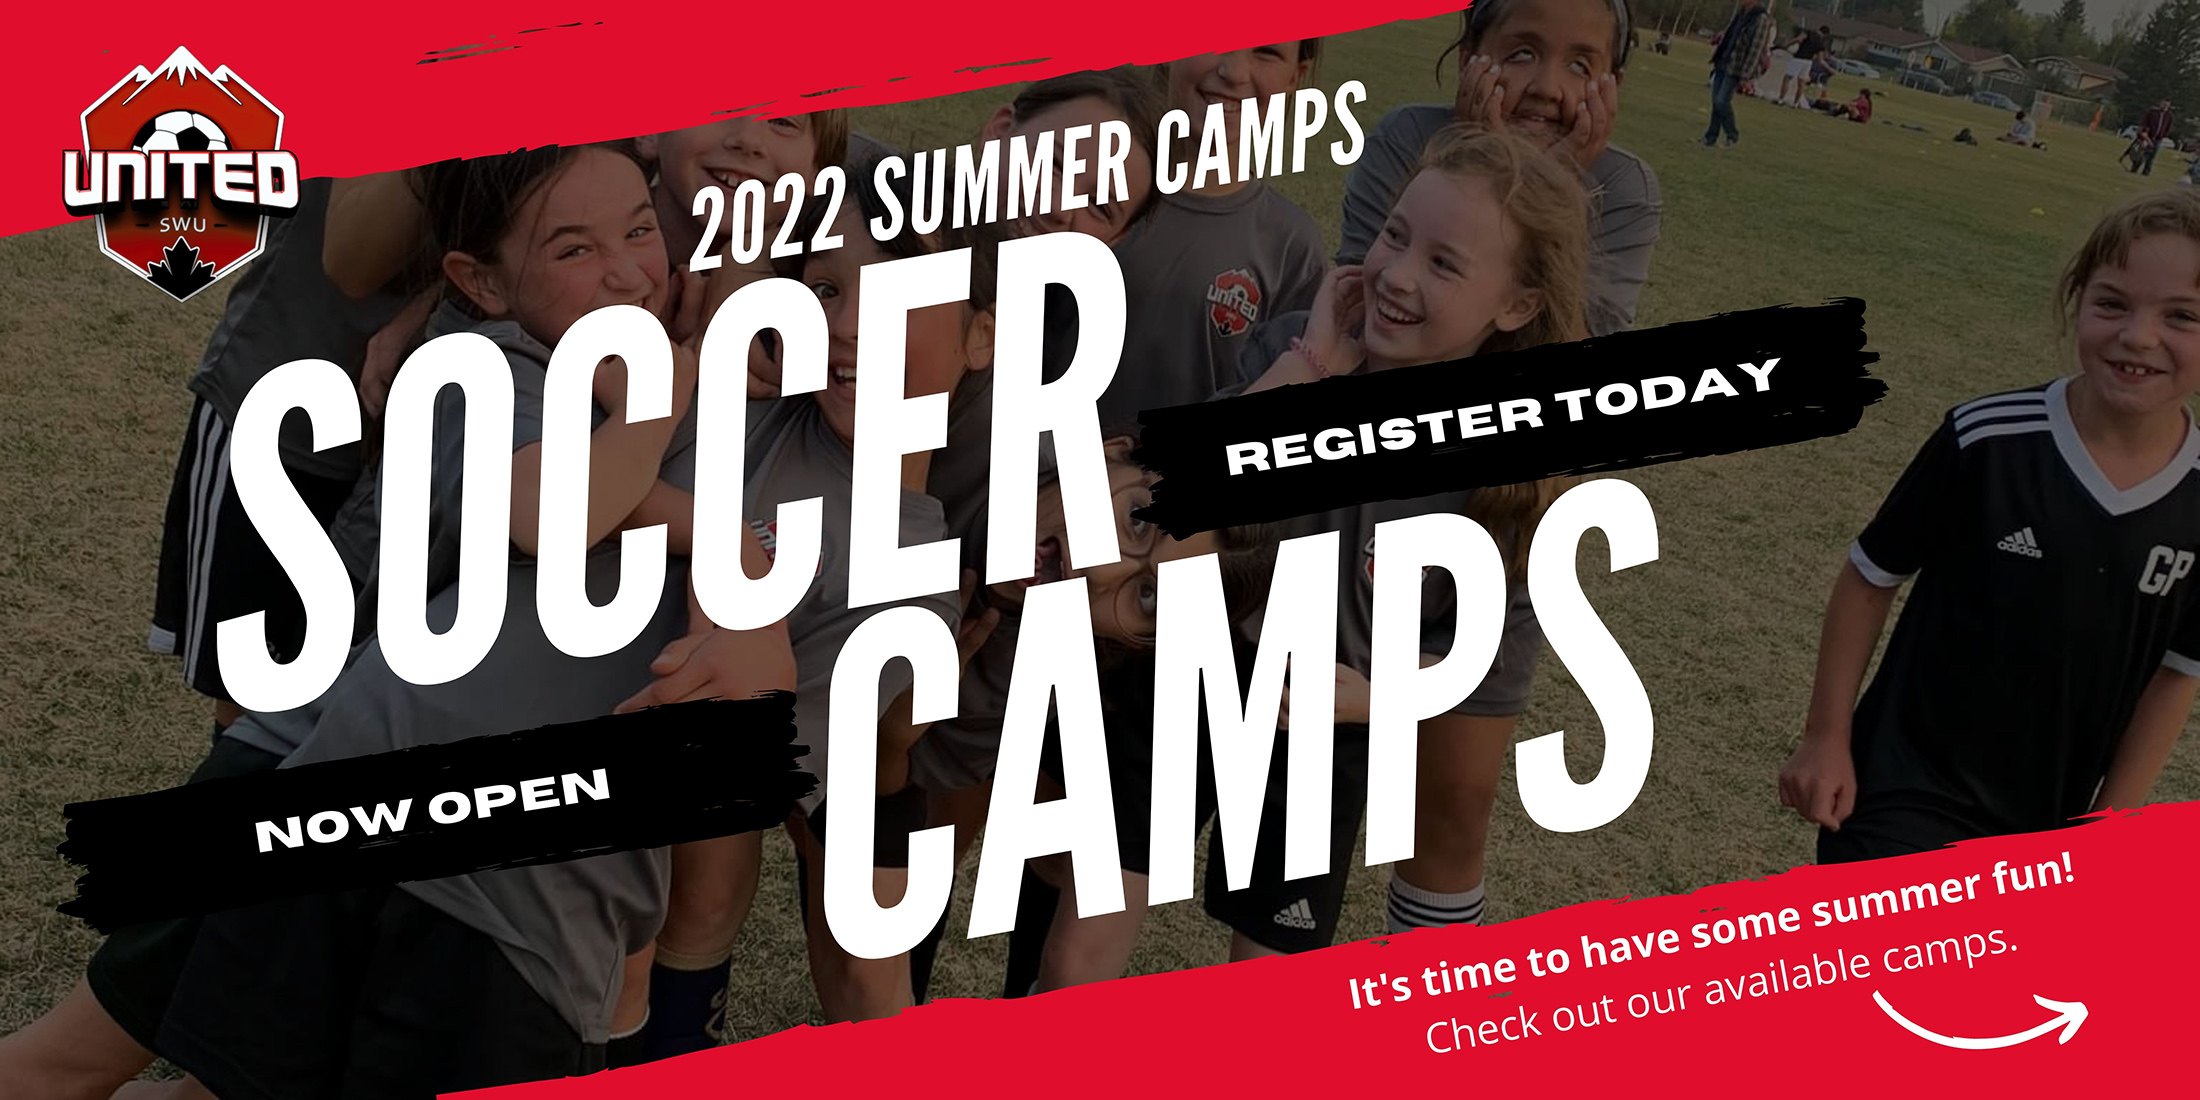 CSWU Summer Camps